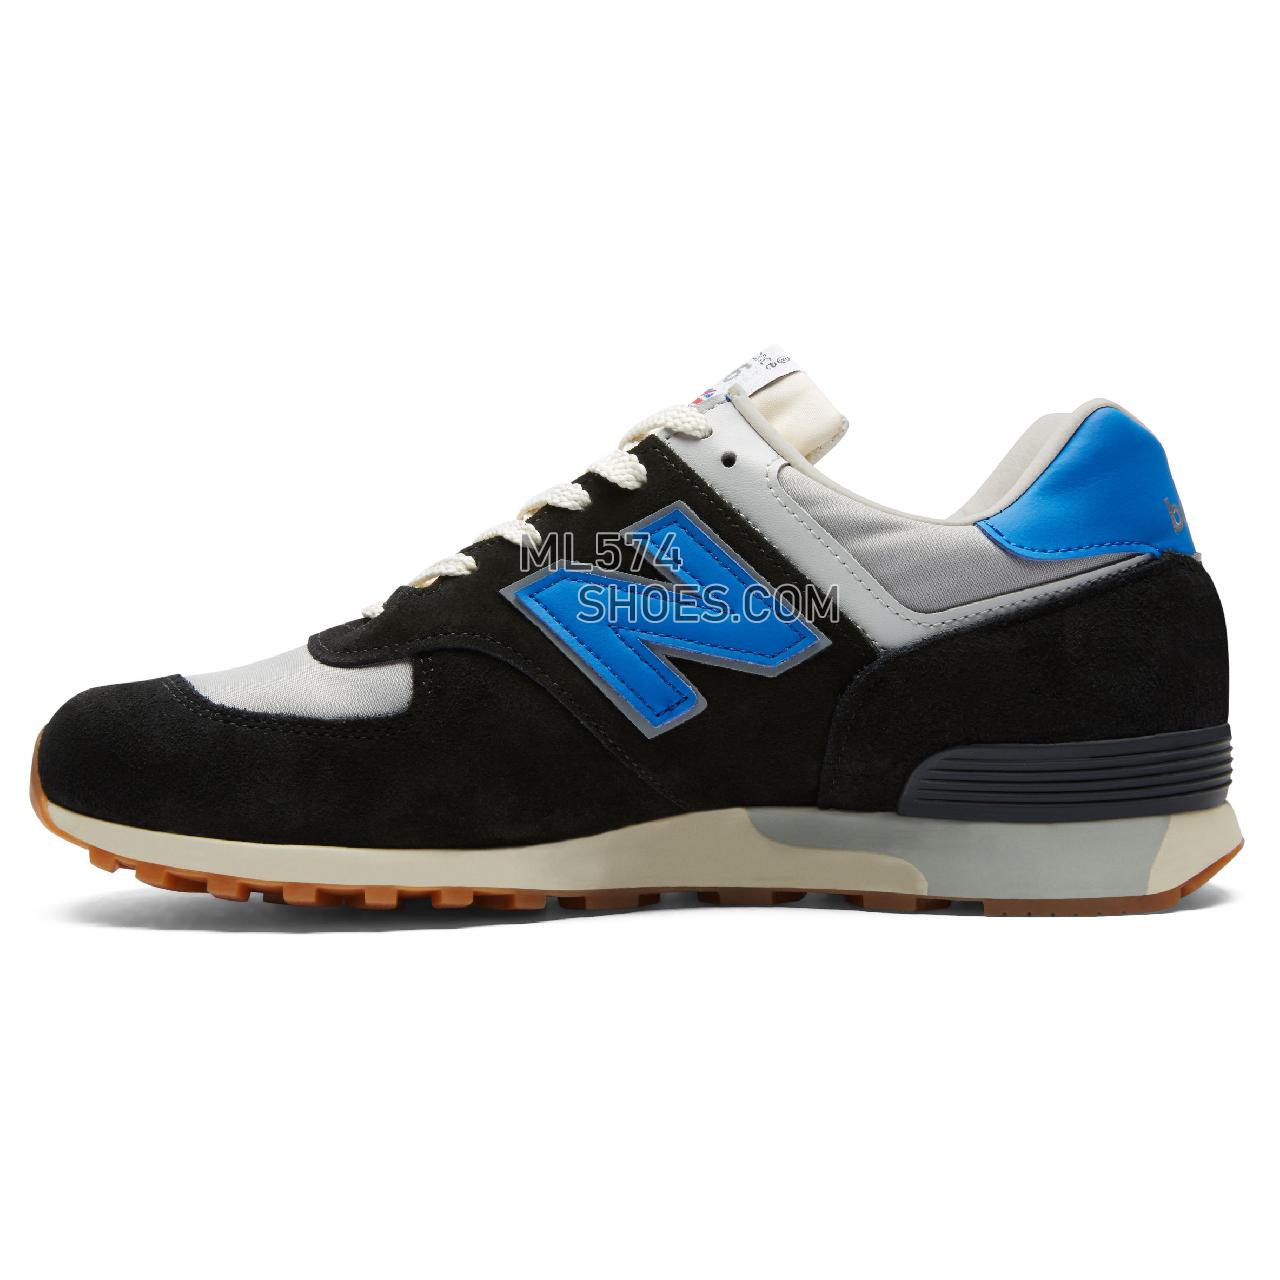 New Balance Made in UK 576 - Men's 576 Made in UK Classic M576-SN - Black with Grey and Blue - M576TNF